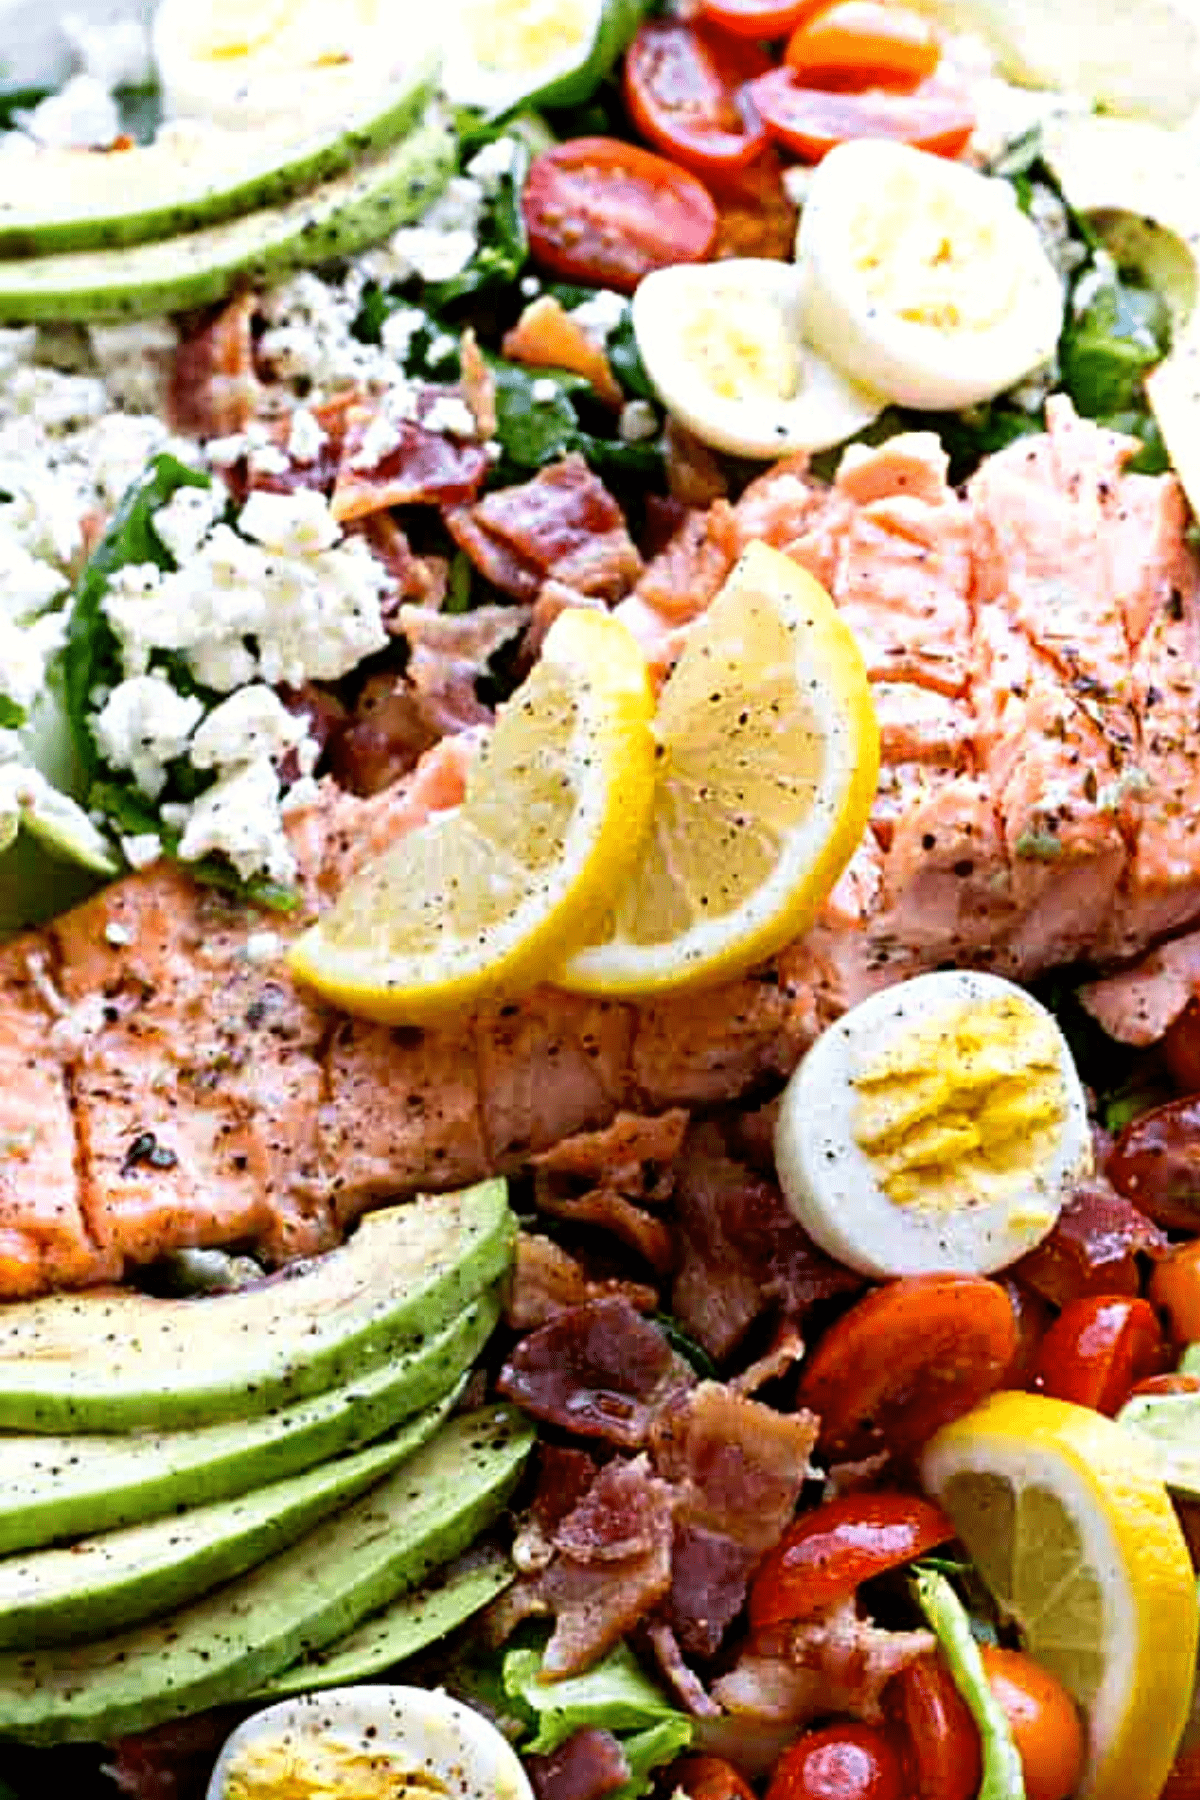 Salmon Cobb Salad with Spinach and Feta - Tender spinach and romaine lettuce topped with delicious oven-baked salmon, tomatoes, eggs, bacon, avocados and feta, all tossed together with a tangy lemon-mustard dressing.